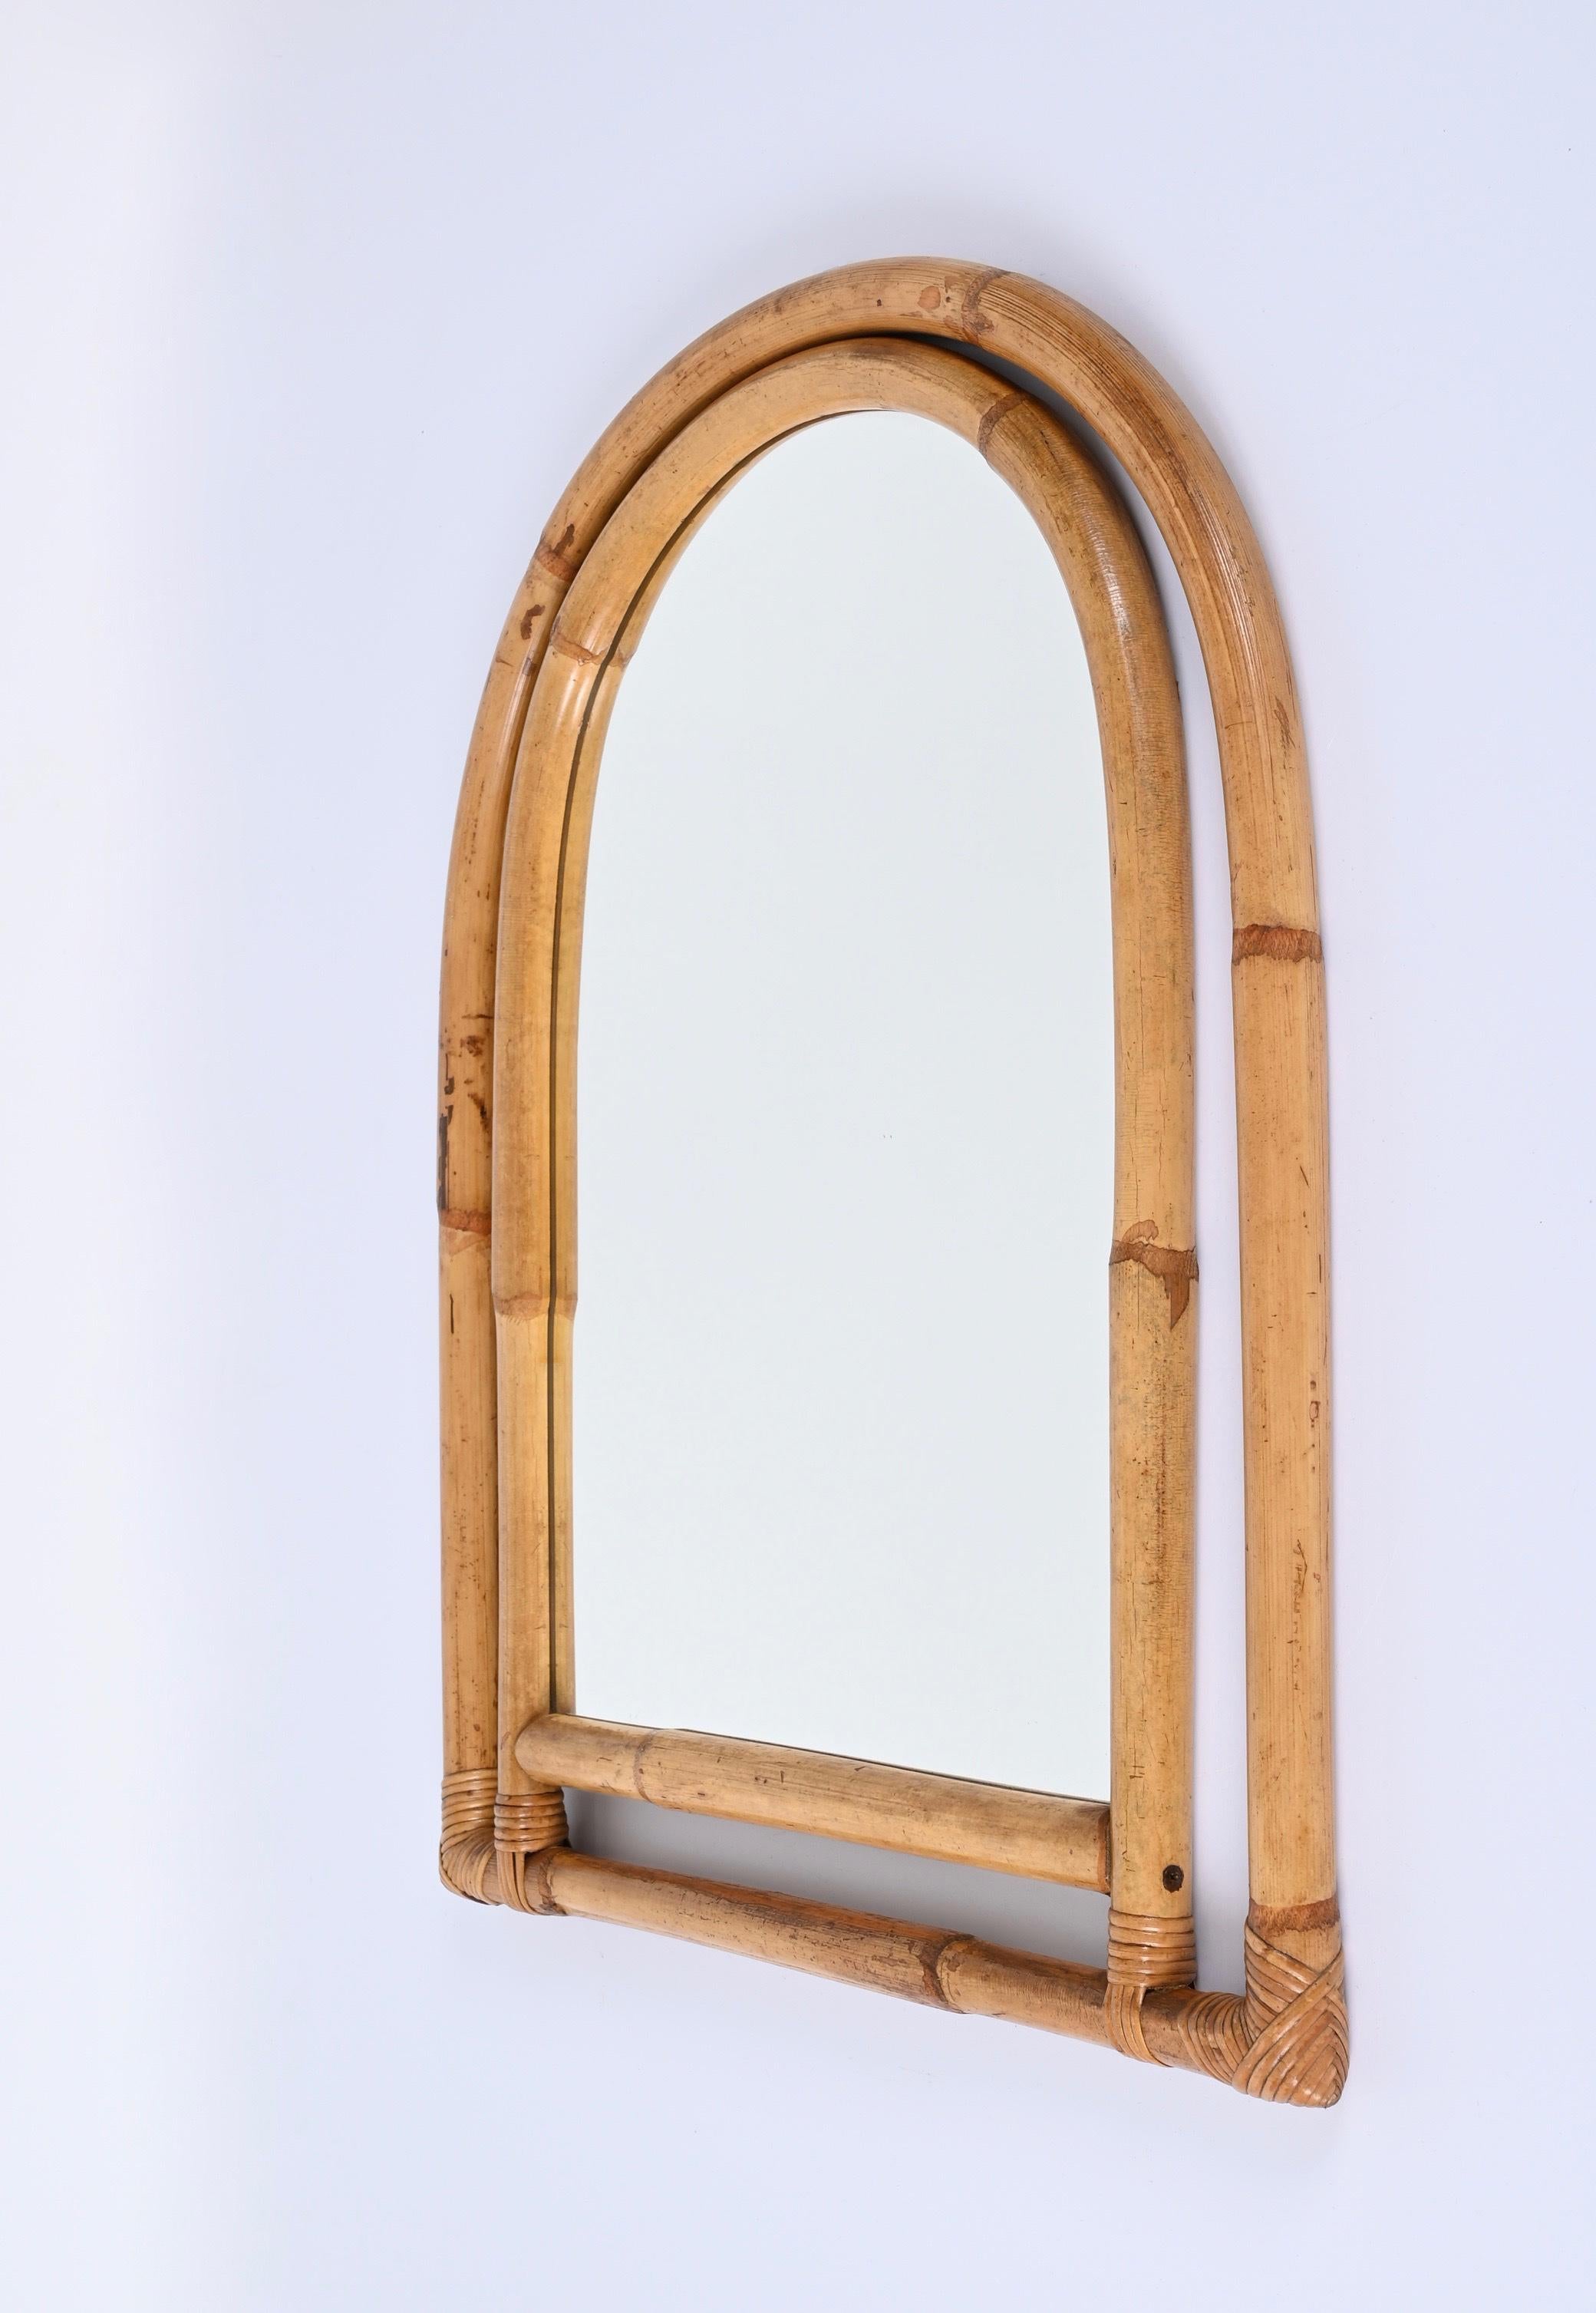 Midcentury Italian Arch Mirror with Double Bamboo and Rattan Frame, Italy, 1970s For Sale 3